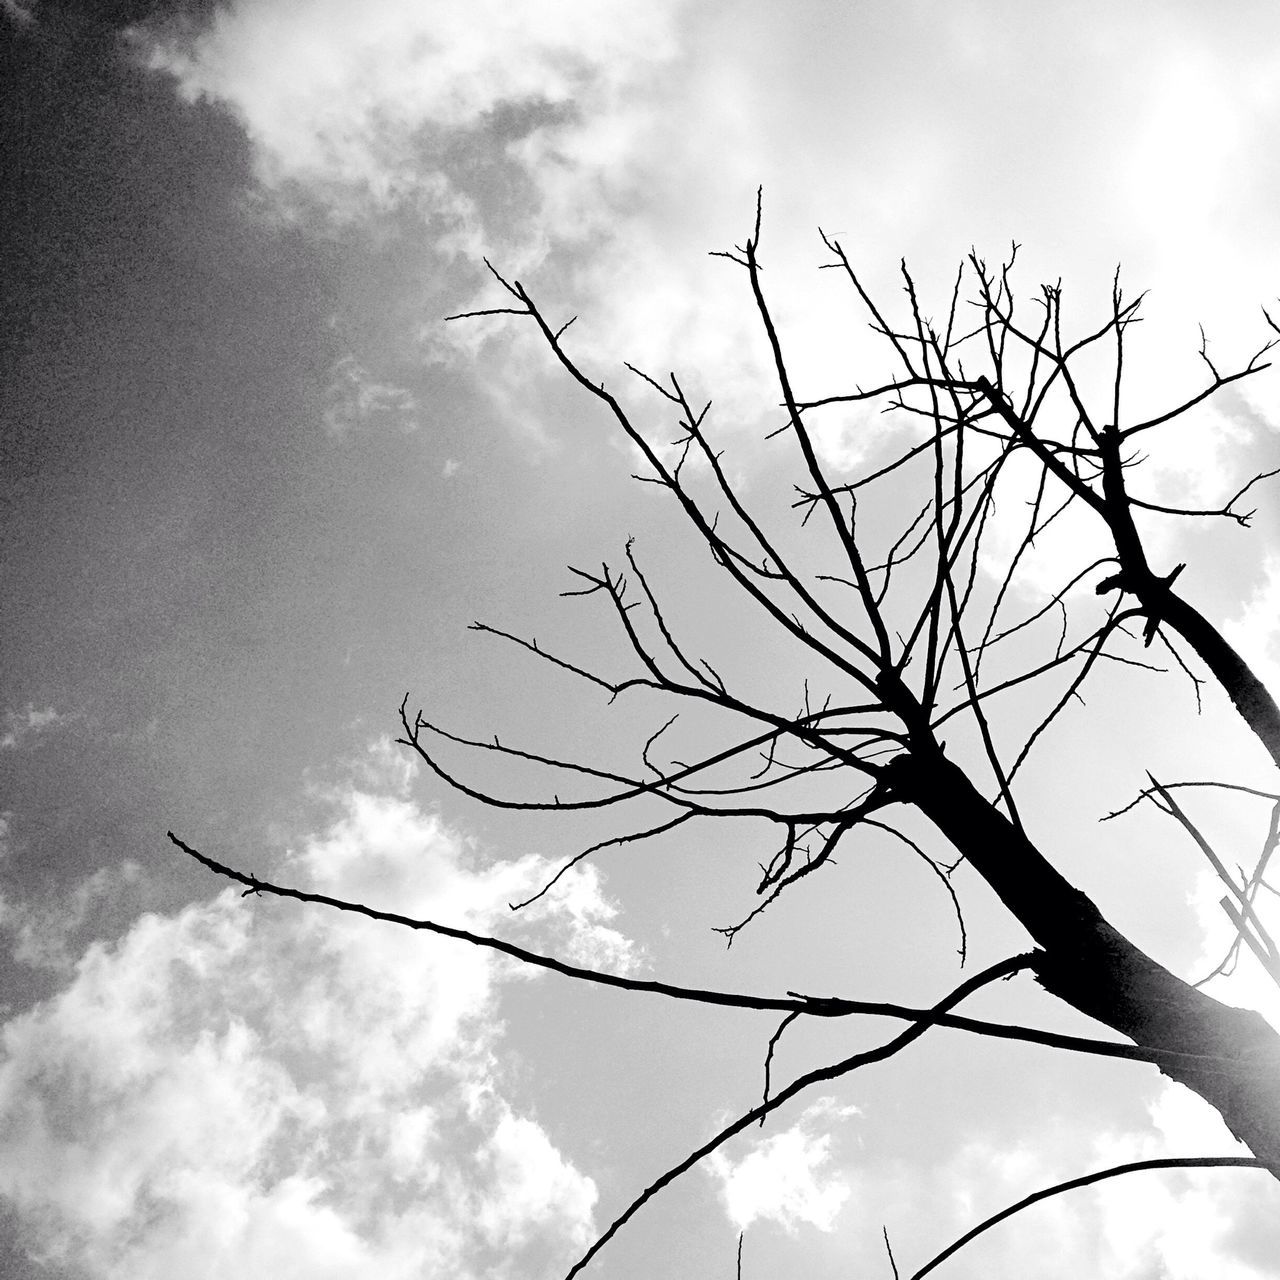 low angle view, sky, bare tree, cloud - sky, branch, tree, cloud, cloudy, nature, tranquility, bird, day, outdoors, silhouette, no people, beauty in nature, dead plant, twig, scenics, animal themes